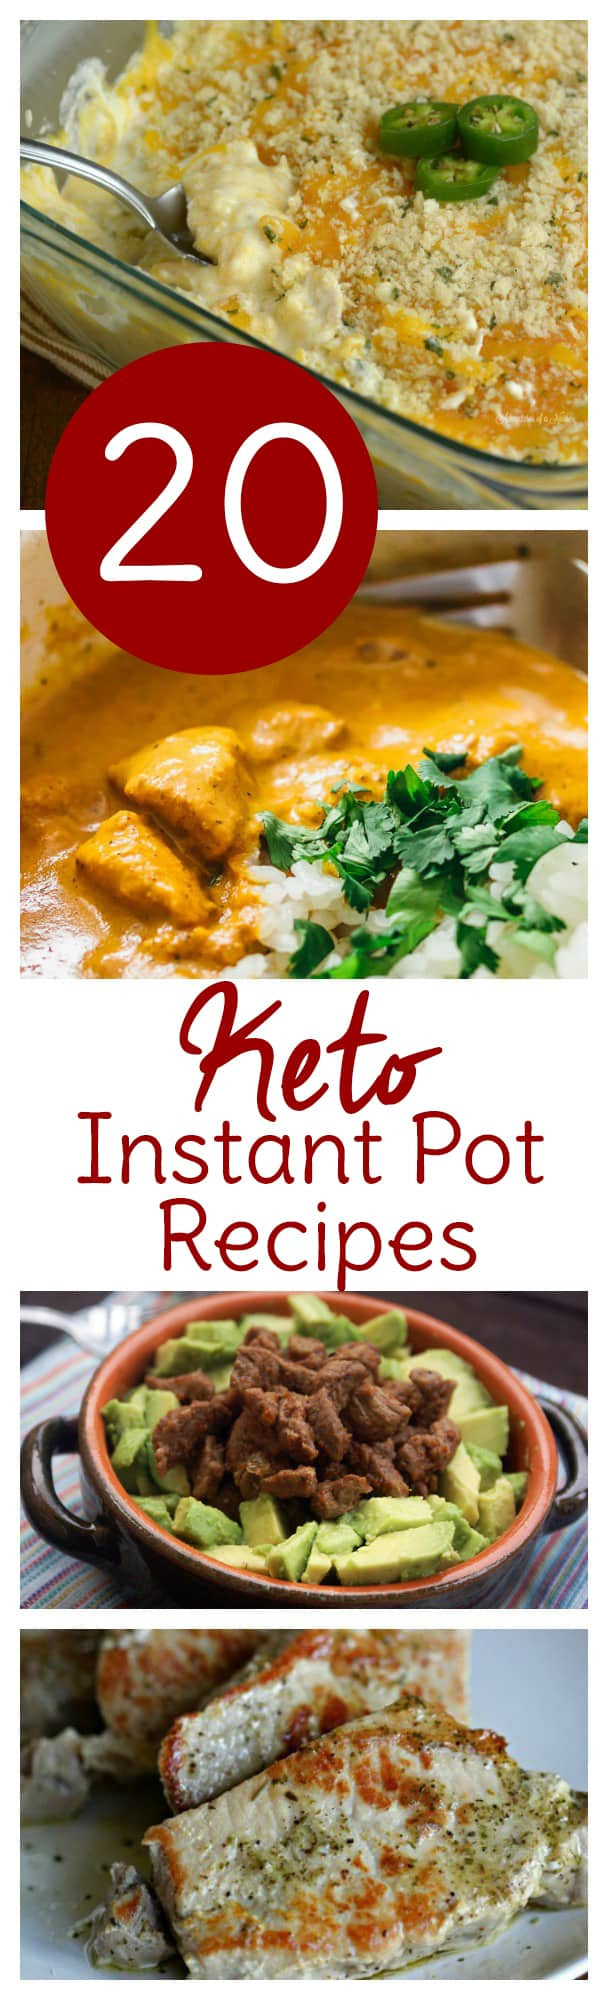 Keto Diet Instant Pot
 20 Instant Pot Keto Recipes to Make This Week